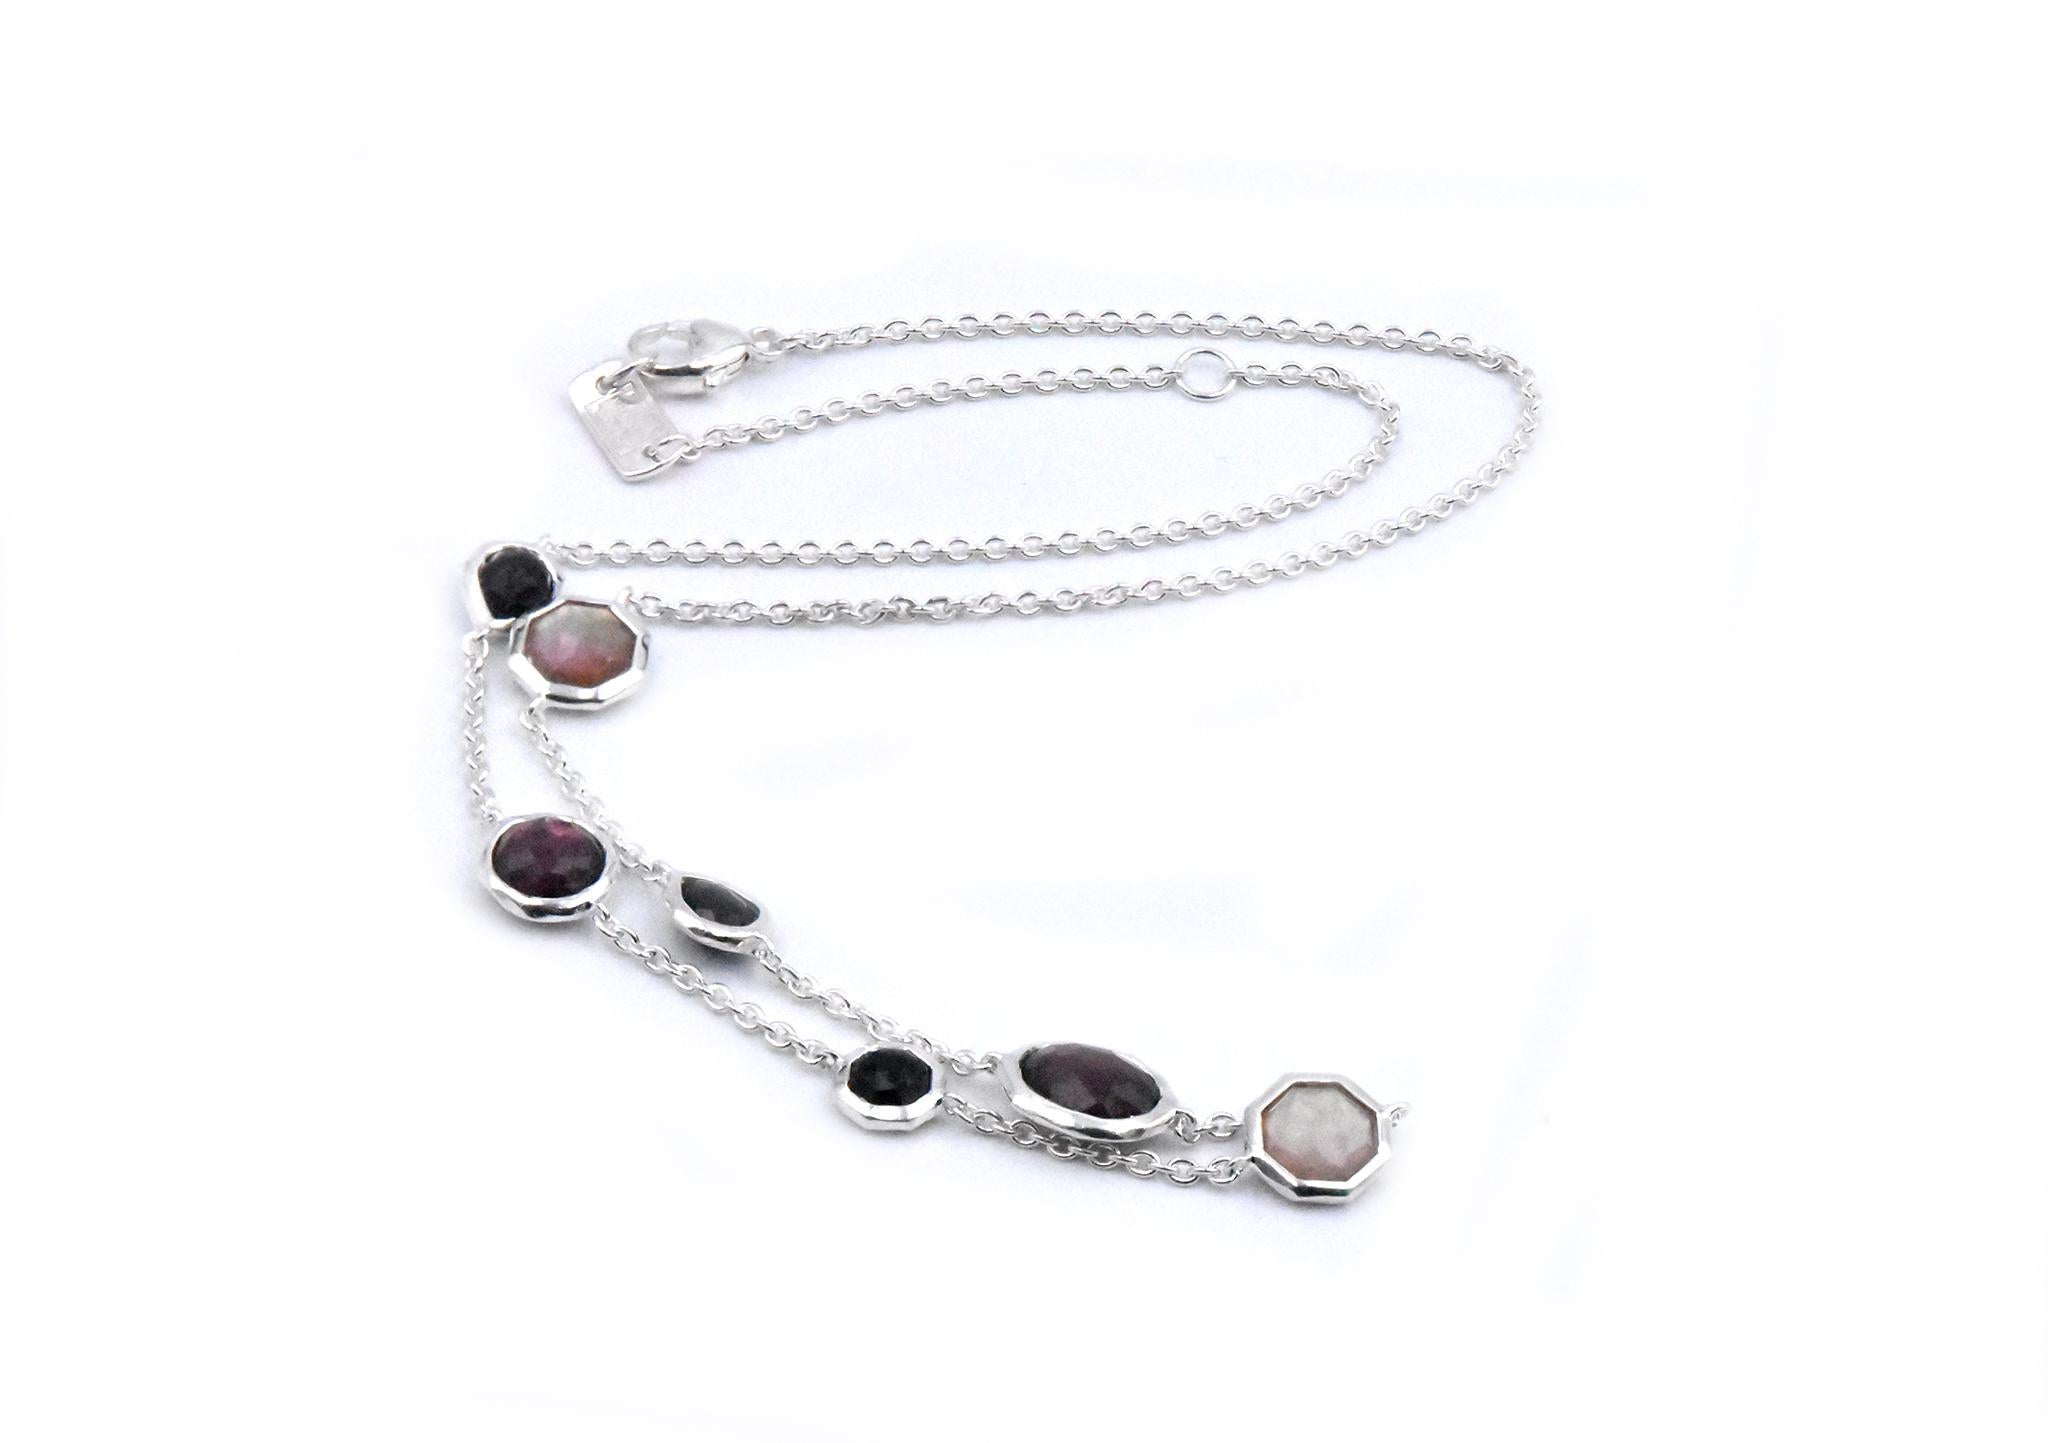 Designer: Ippolita
Material: sterling silver
Weight: 8.35 grams
Measurement: necklace measures 18-20-inches in length